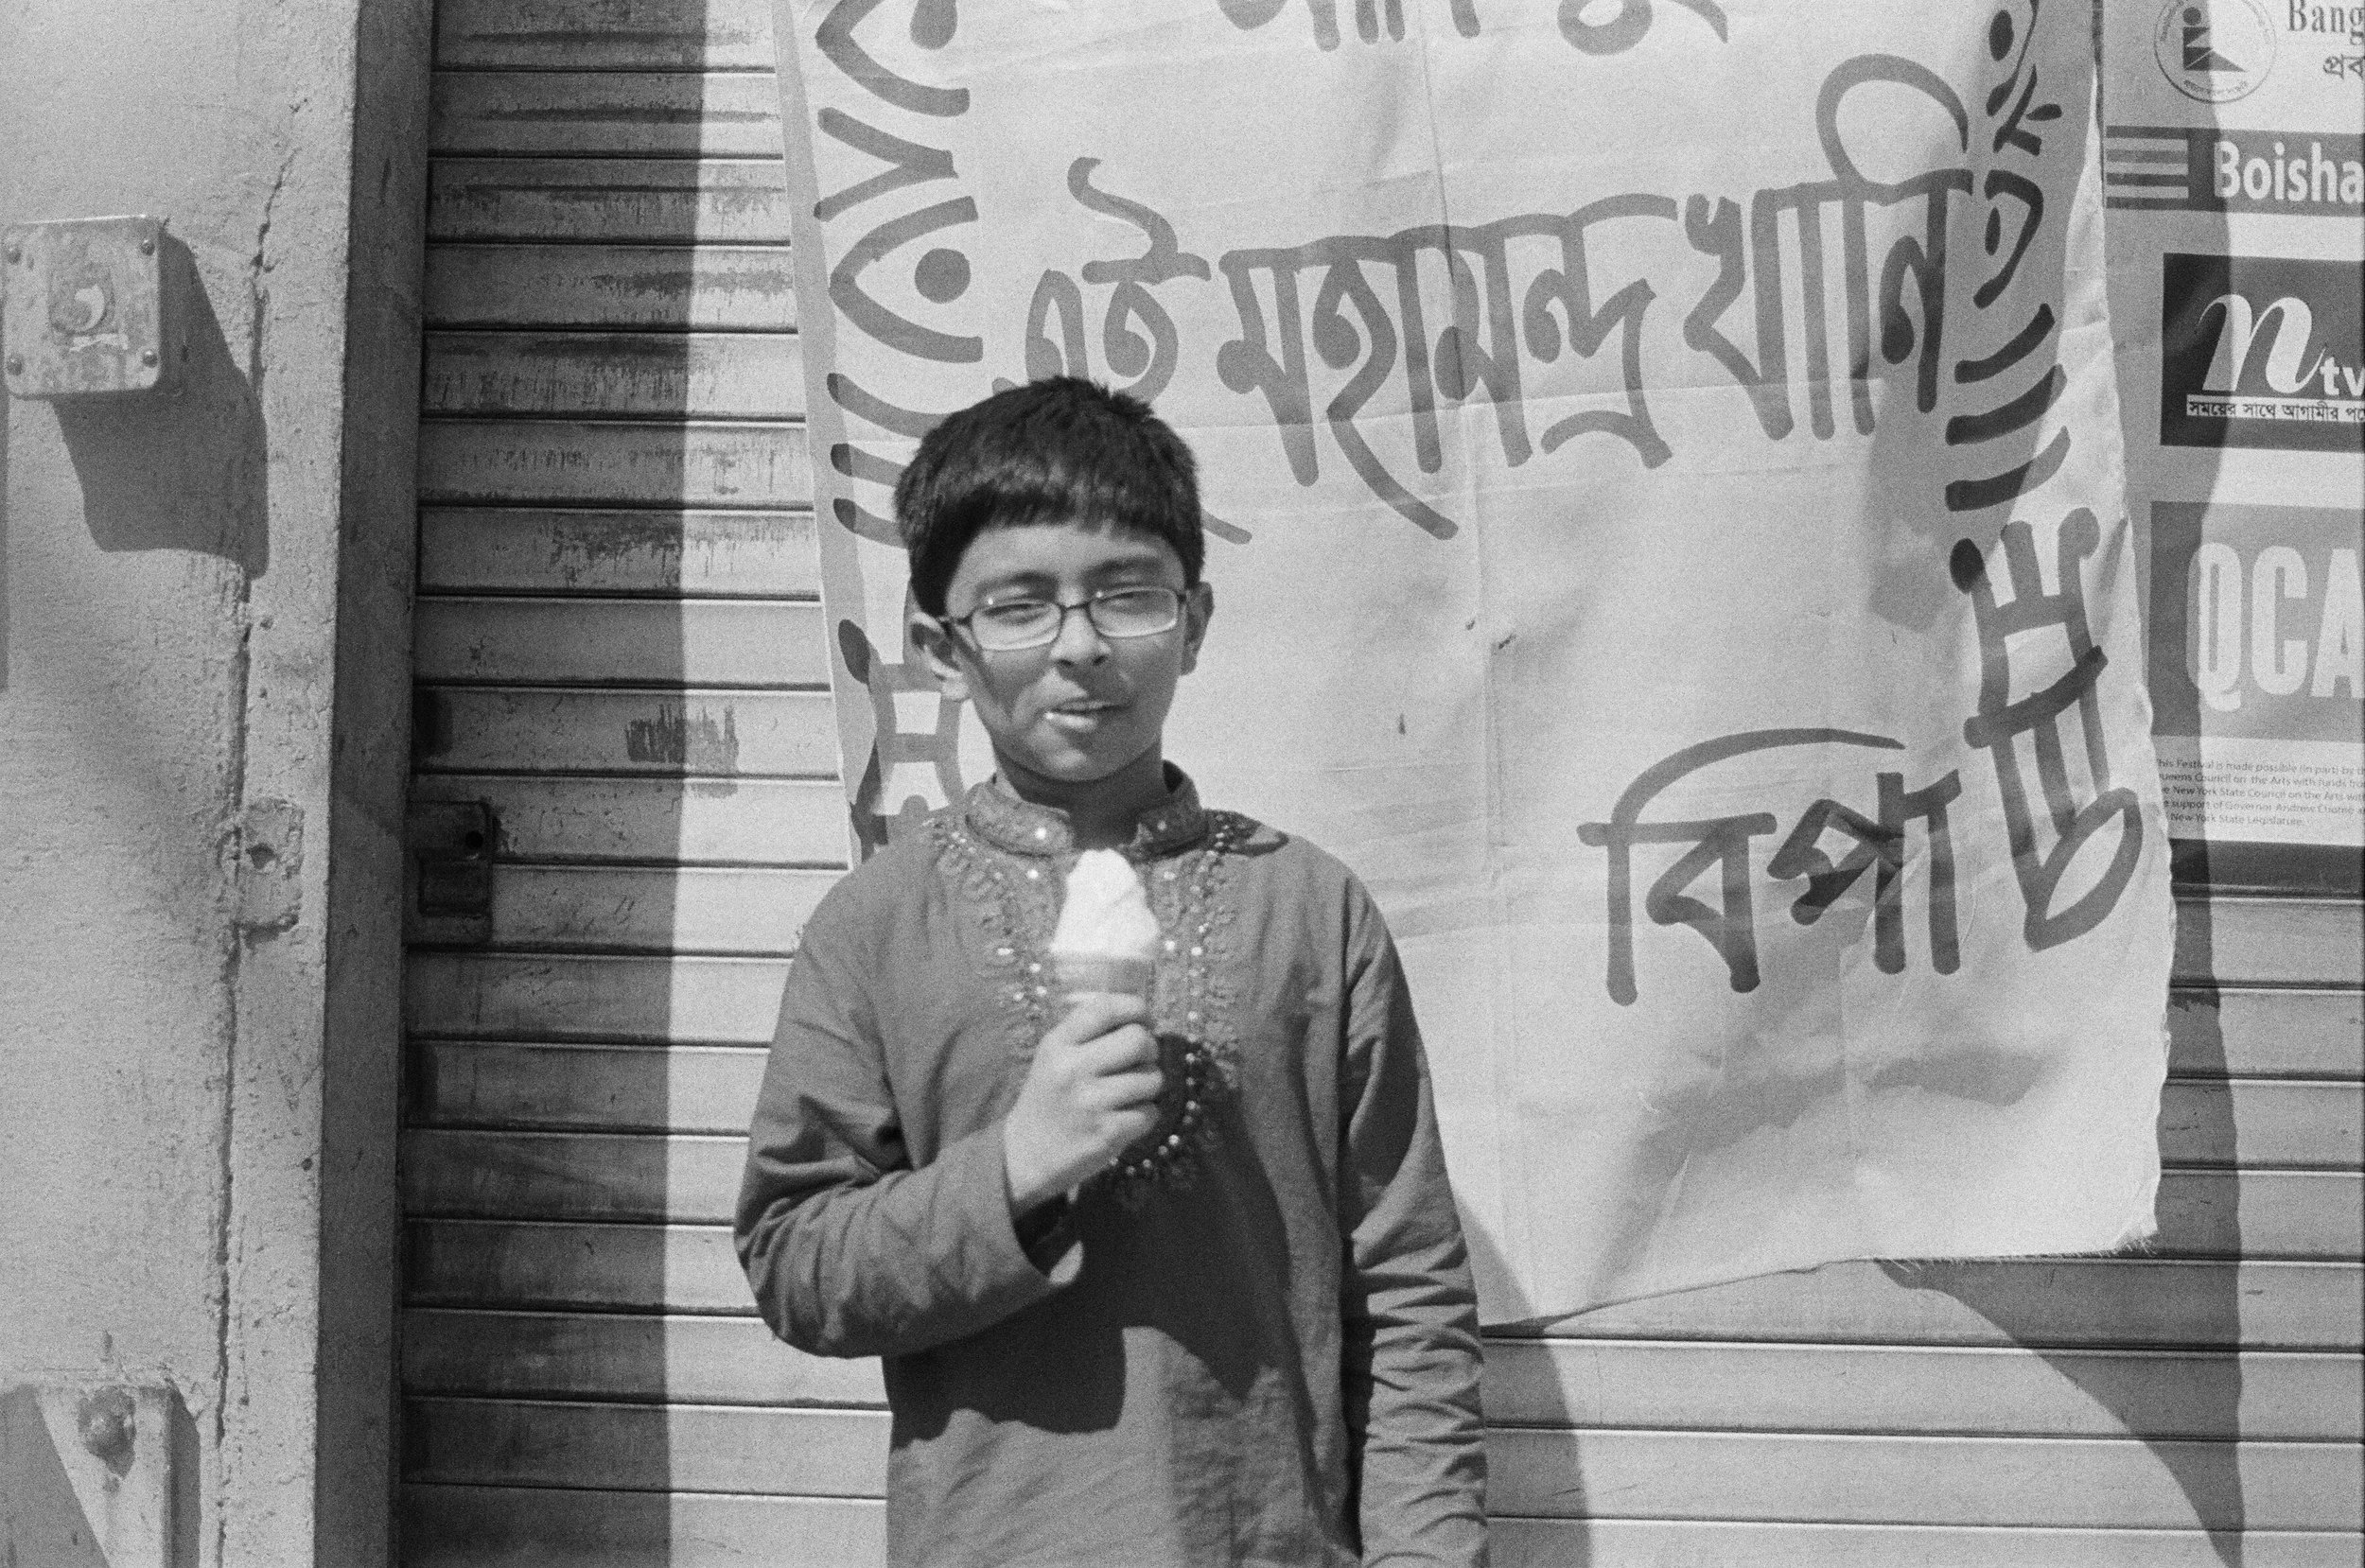   A young boy eats an ice cream cone during a Bengali day celebration.  